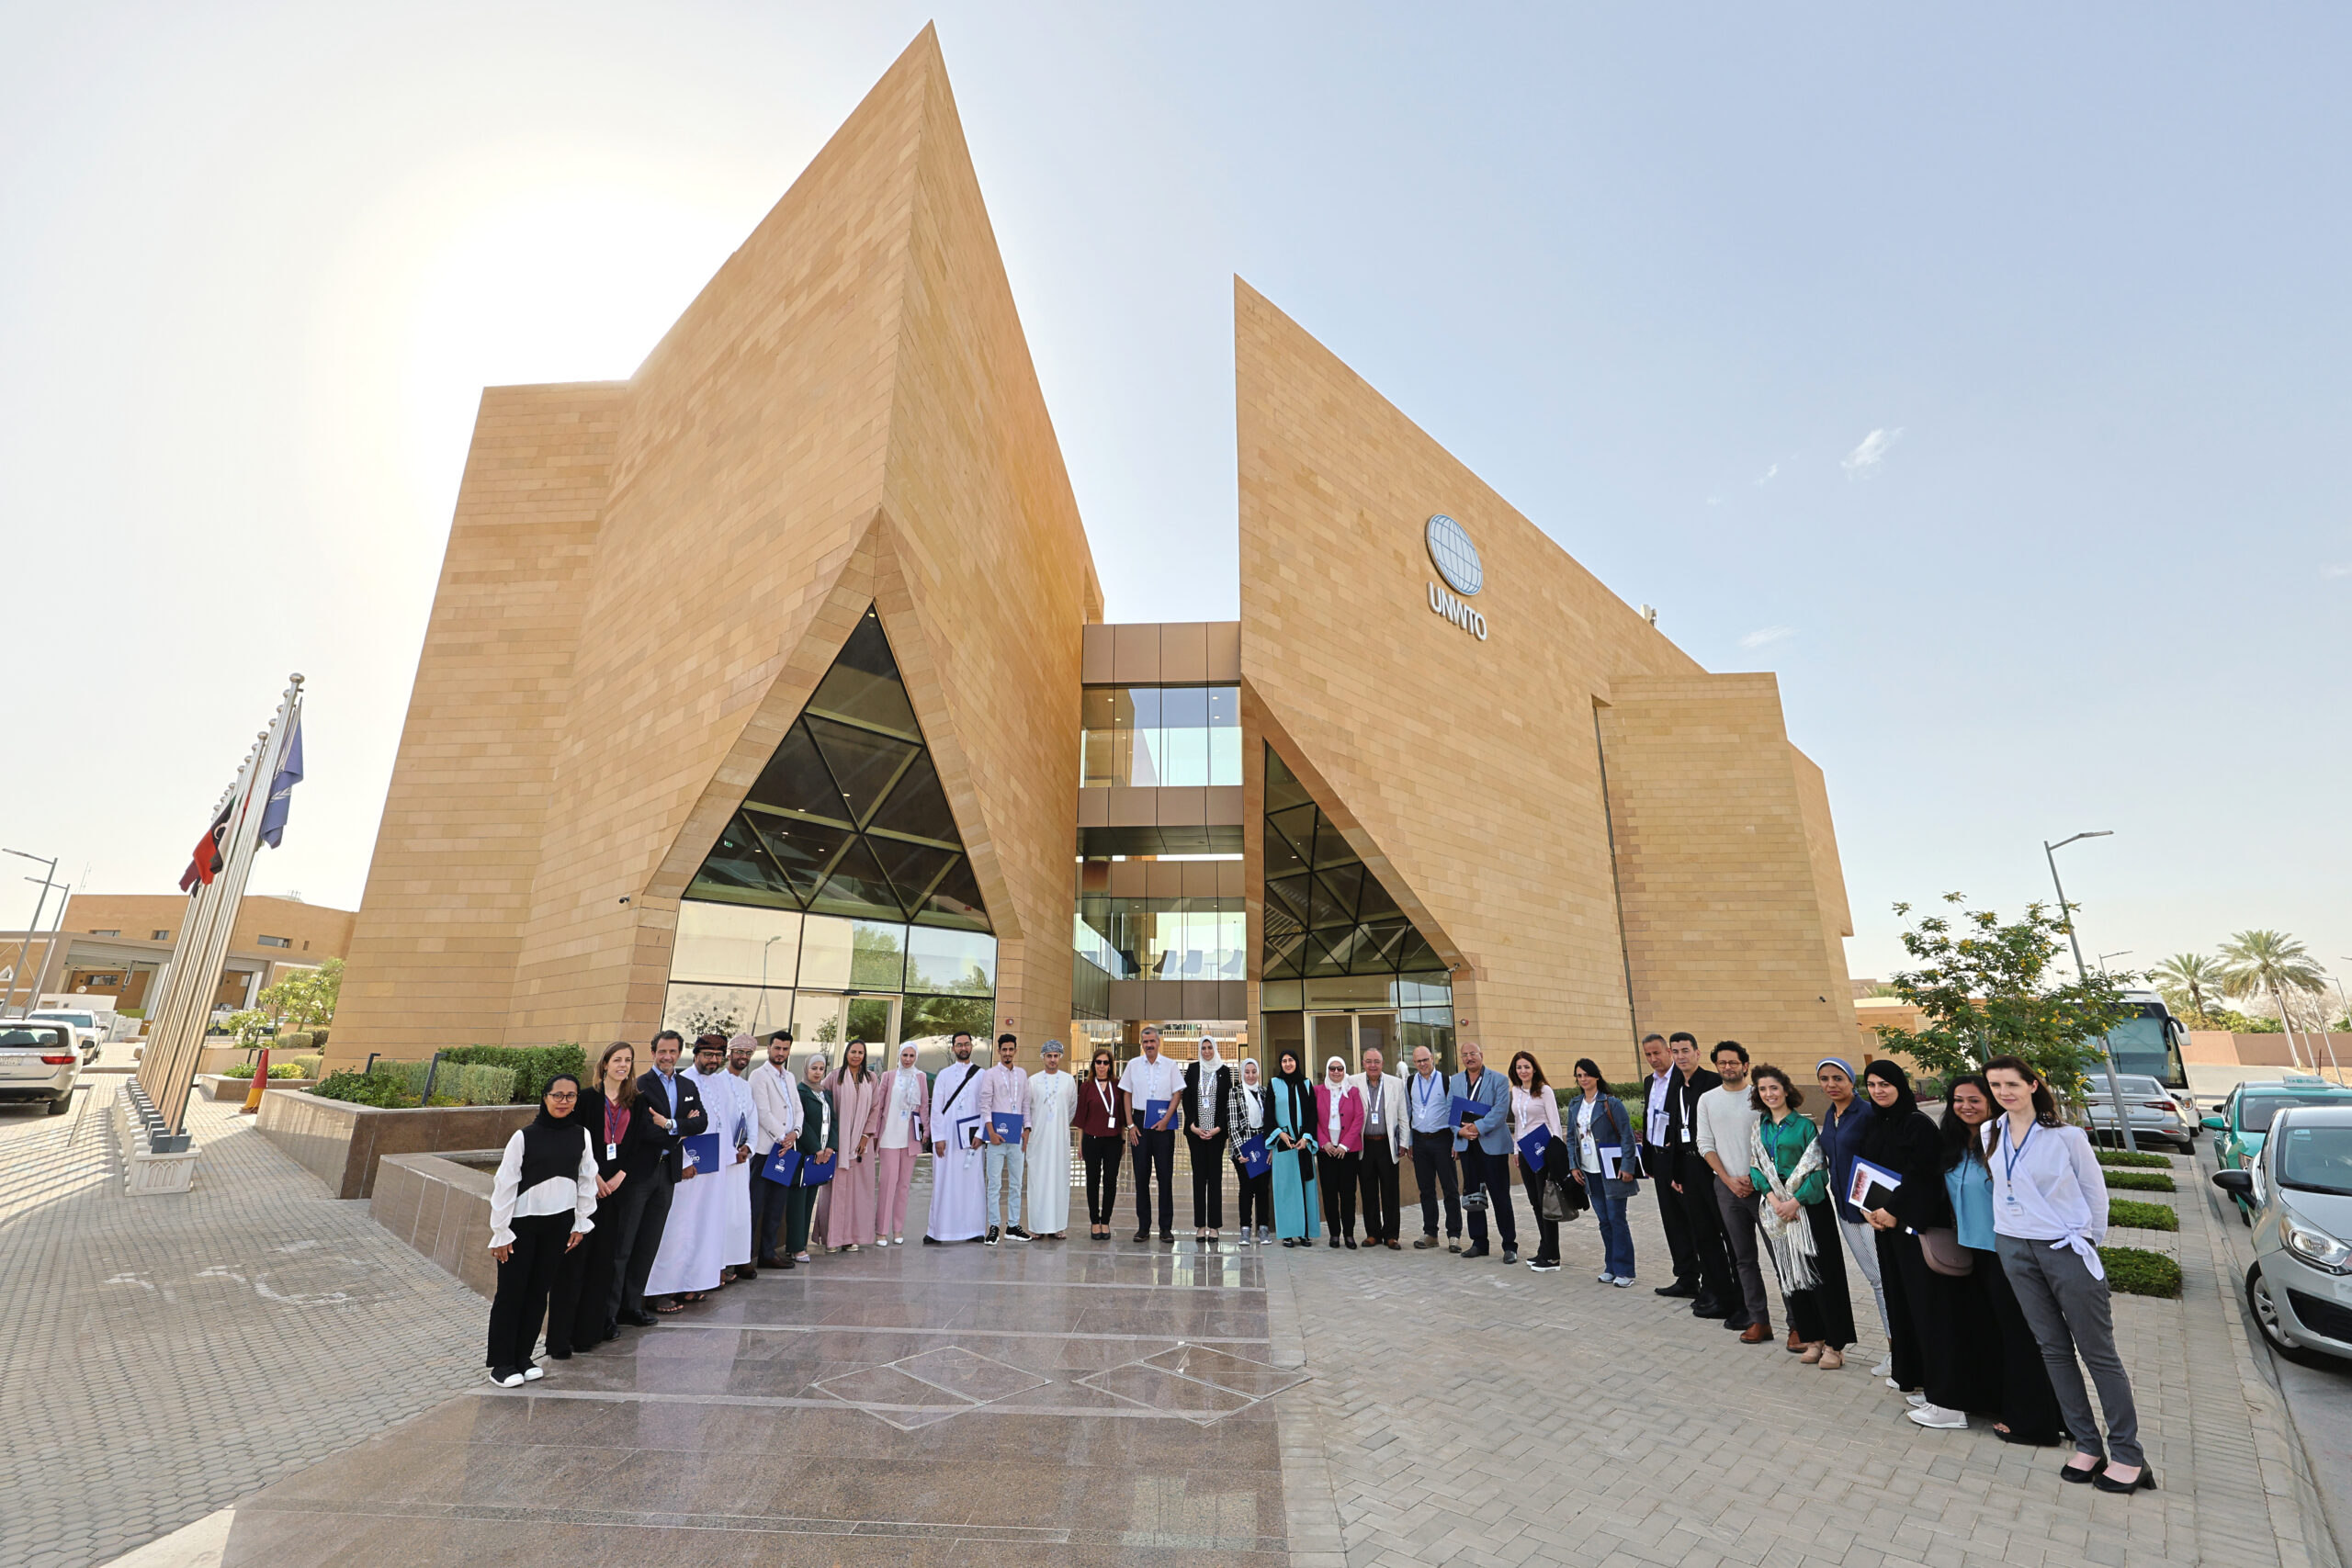 UNWTO HOSTS EXECUTIVE TRAINING ON TOURISM FOR RURAL DEVELOPMENT IN MIDDLE EAST